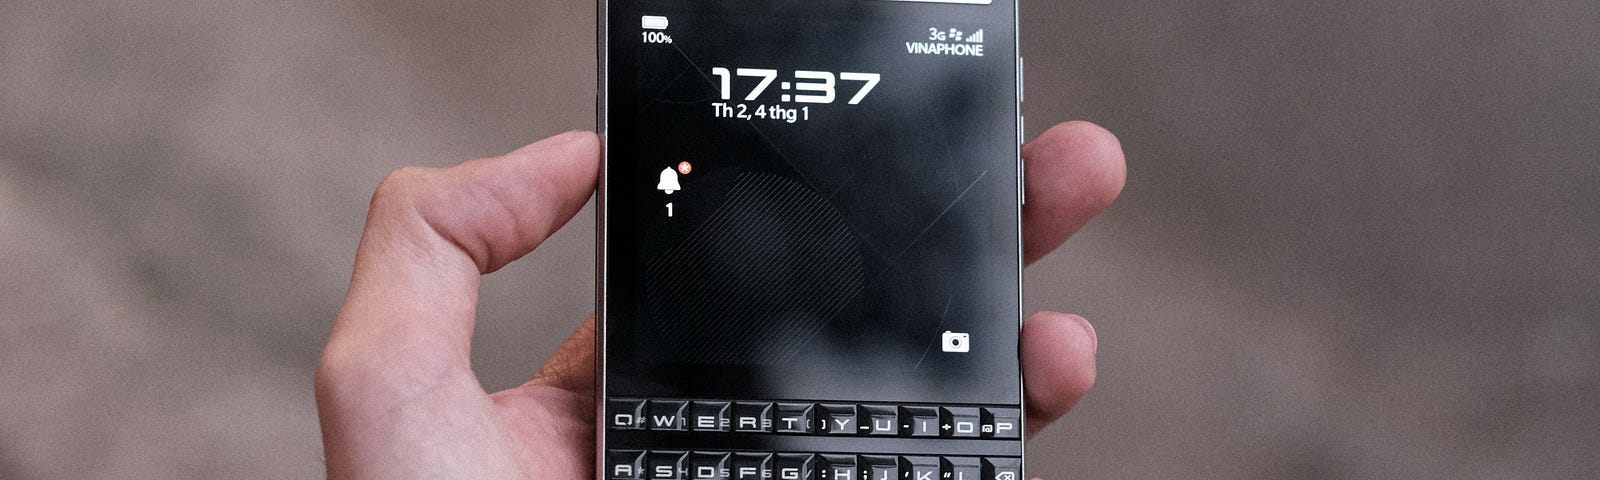 An open hand holds an old BlackBerry smartphone with a physical qwerty keyboard